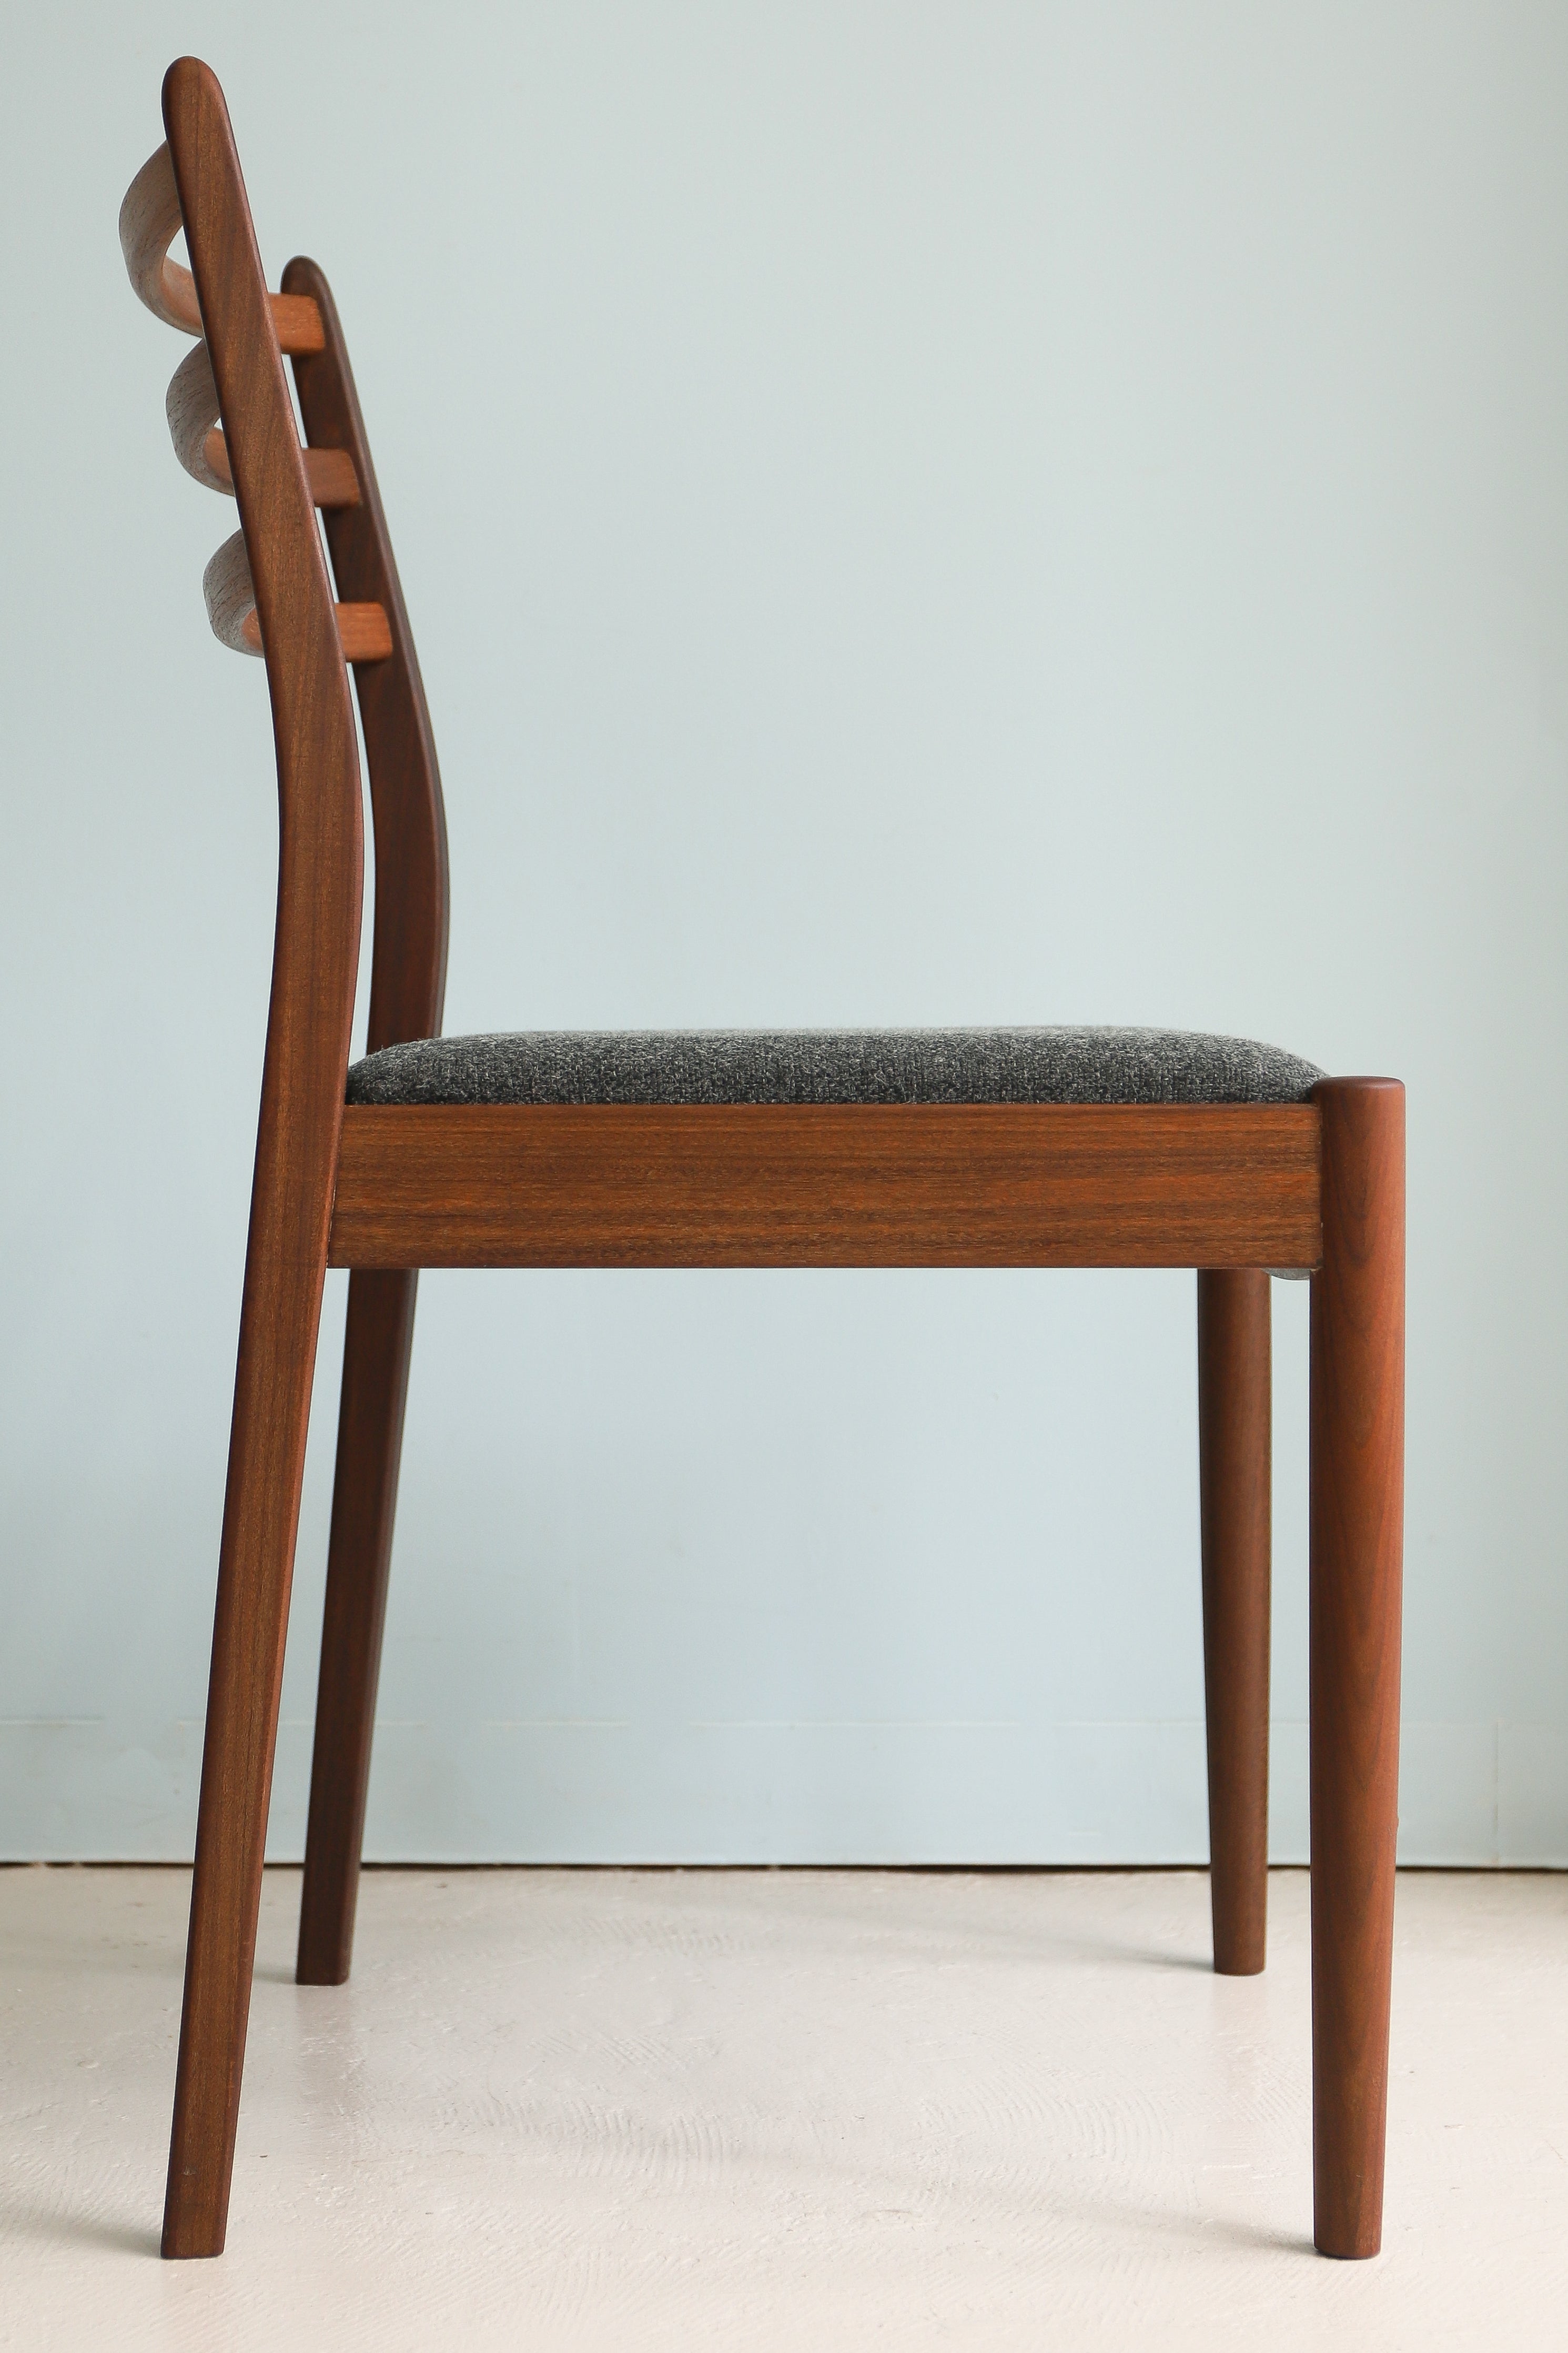 UK Vintage G-PLAN Dining Chair Victor Wilkins/イギリスヴィンテージ ジープラン ダイニングチェア